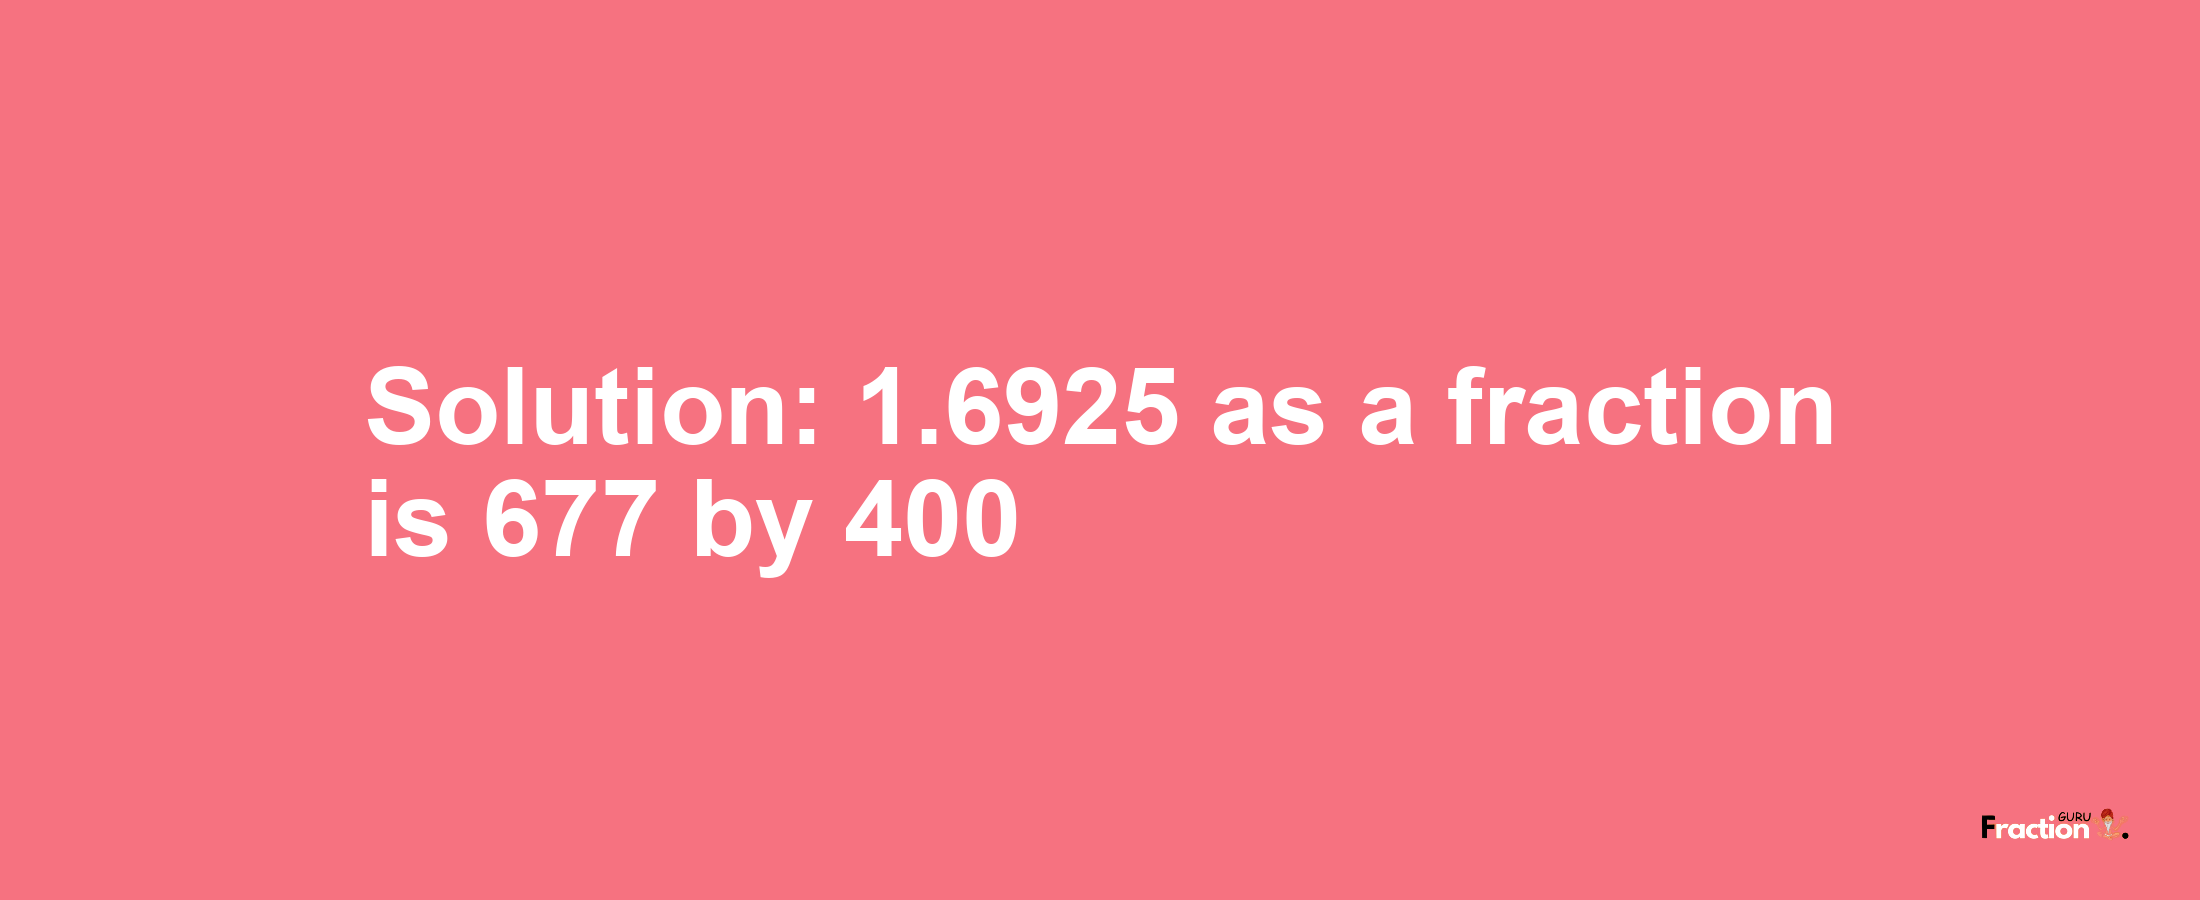 Solution:1.6925 as a fraction is 677/400